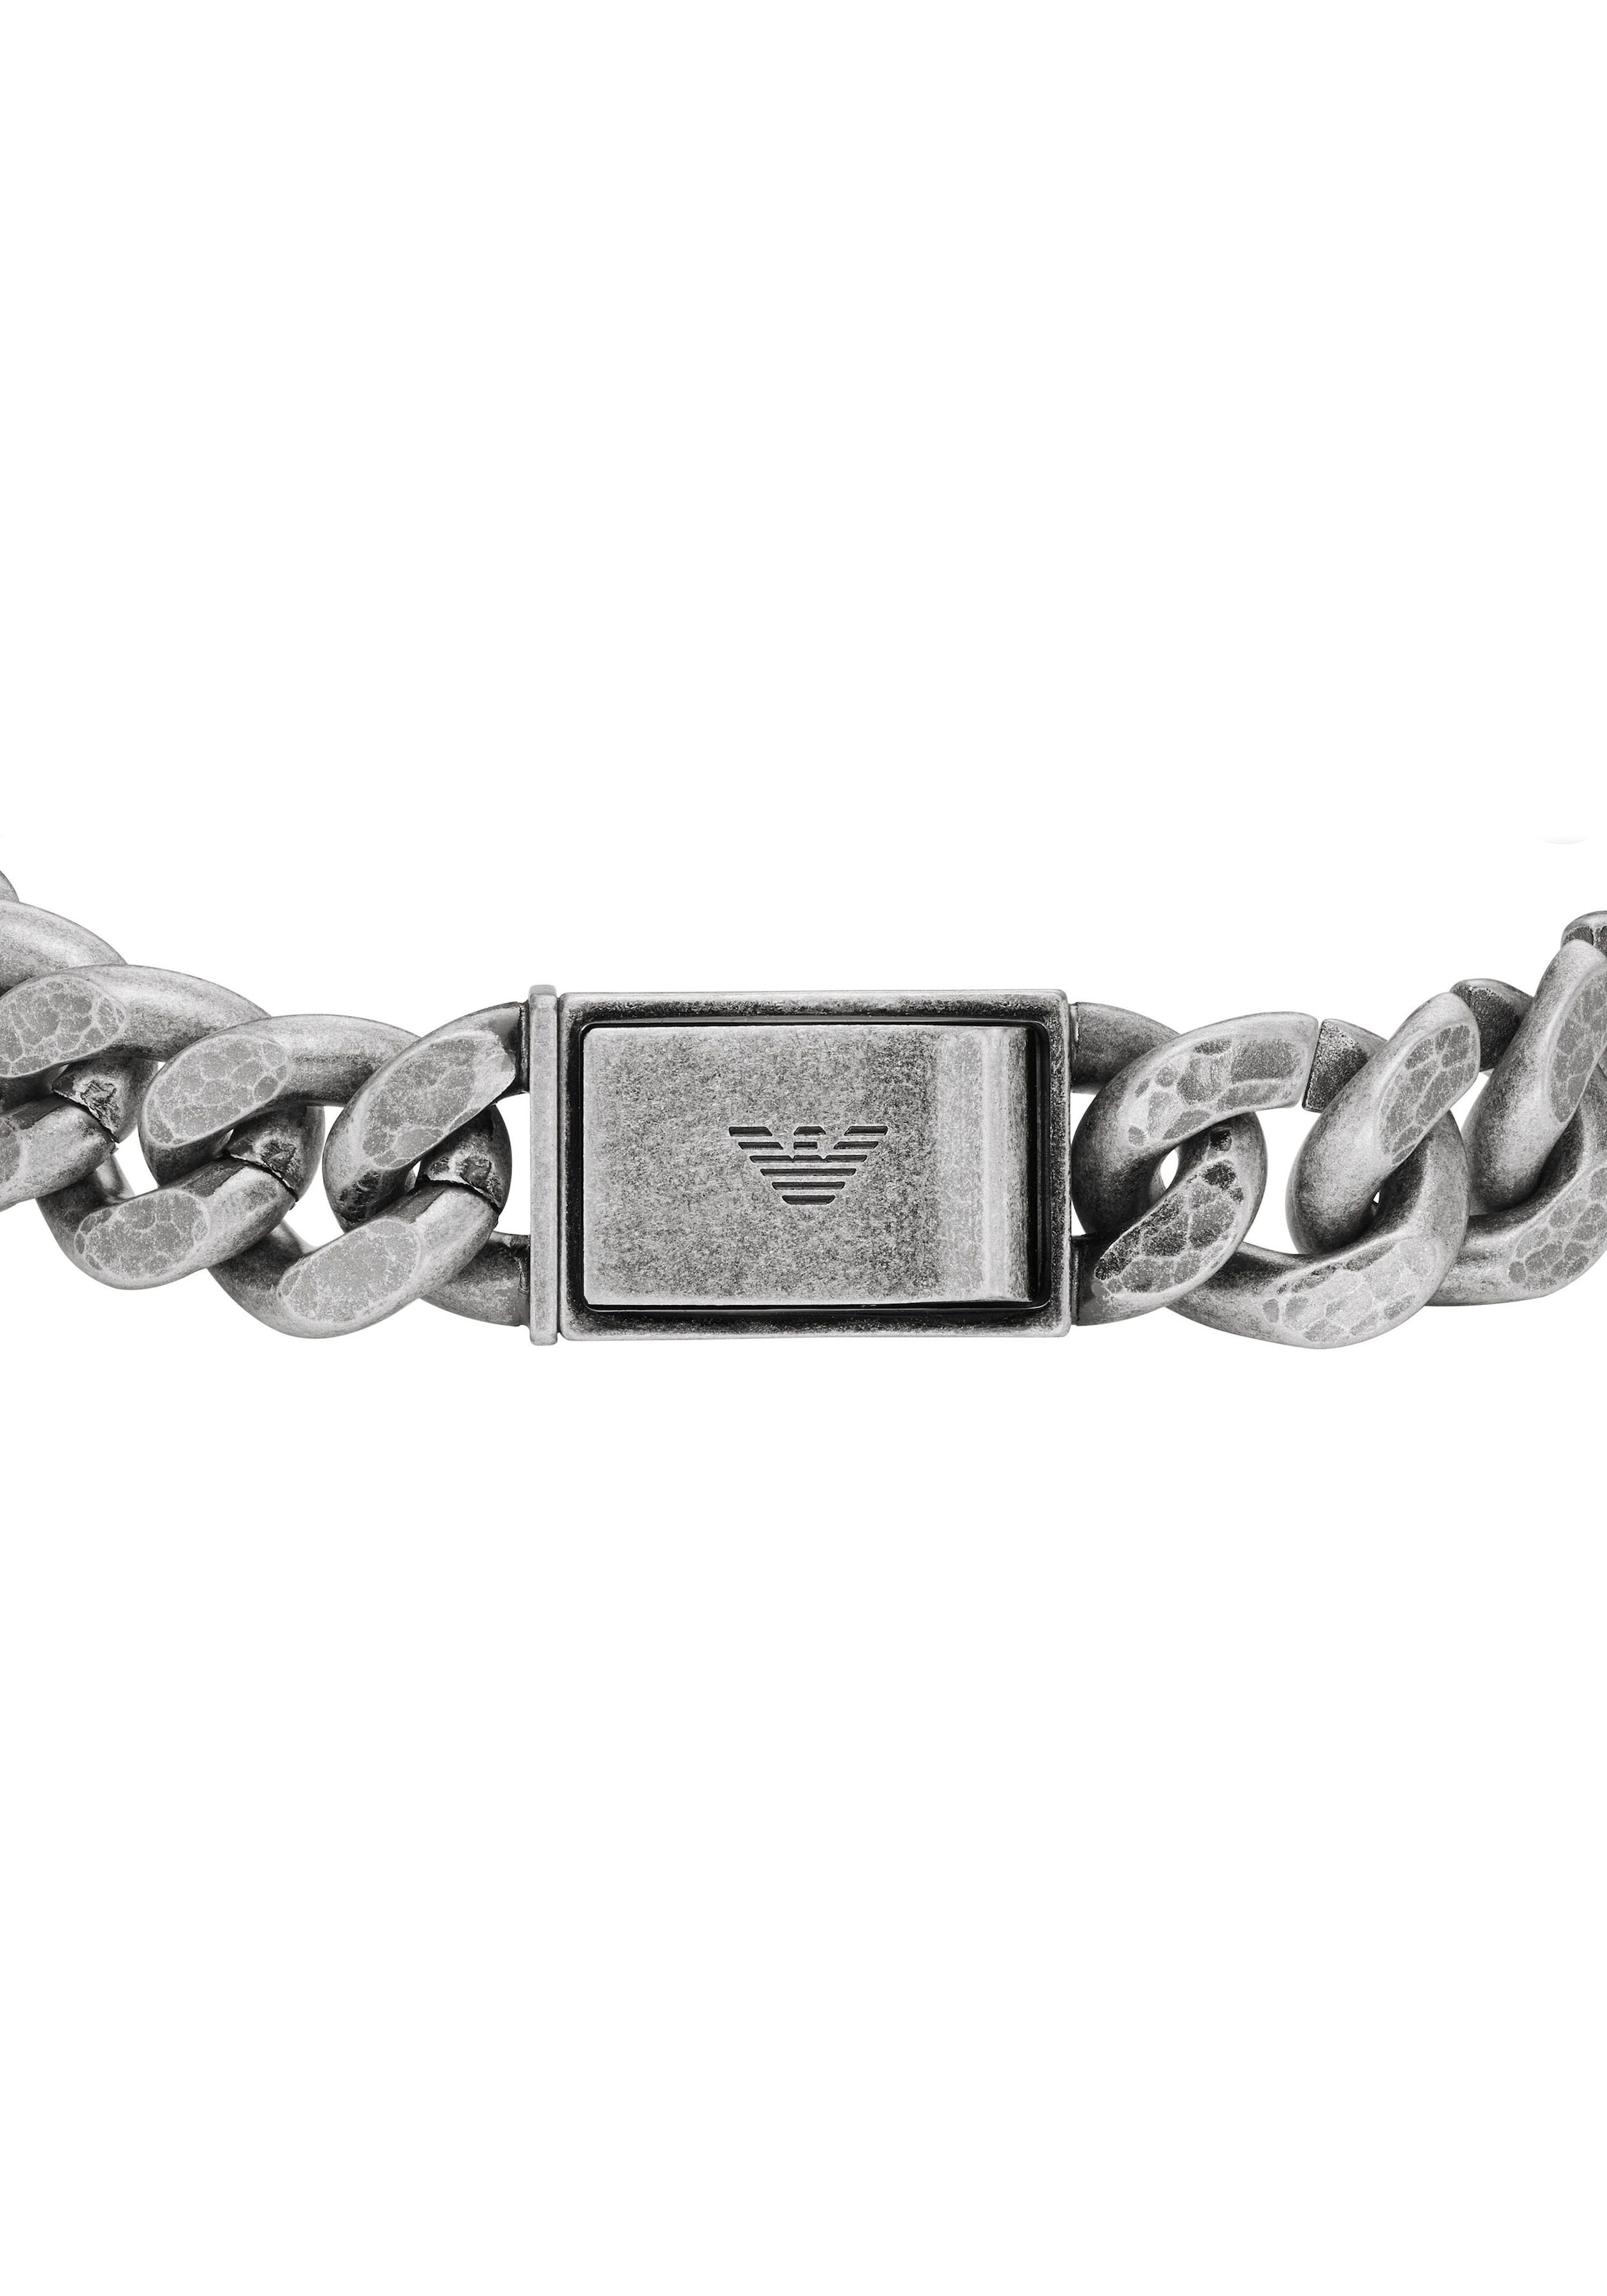 Emporio Armani Armband CHAINED, EGS3036040«, TREND, BAUR | Edelstahl »ICONIC